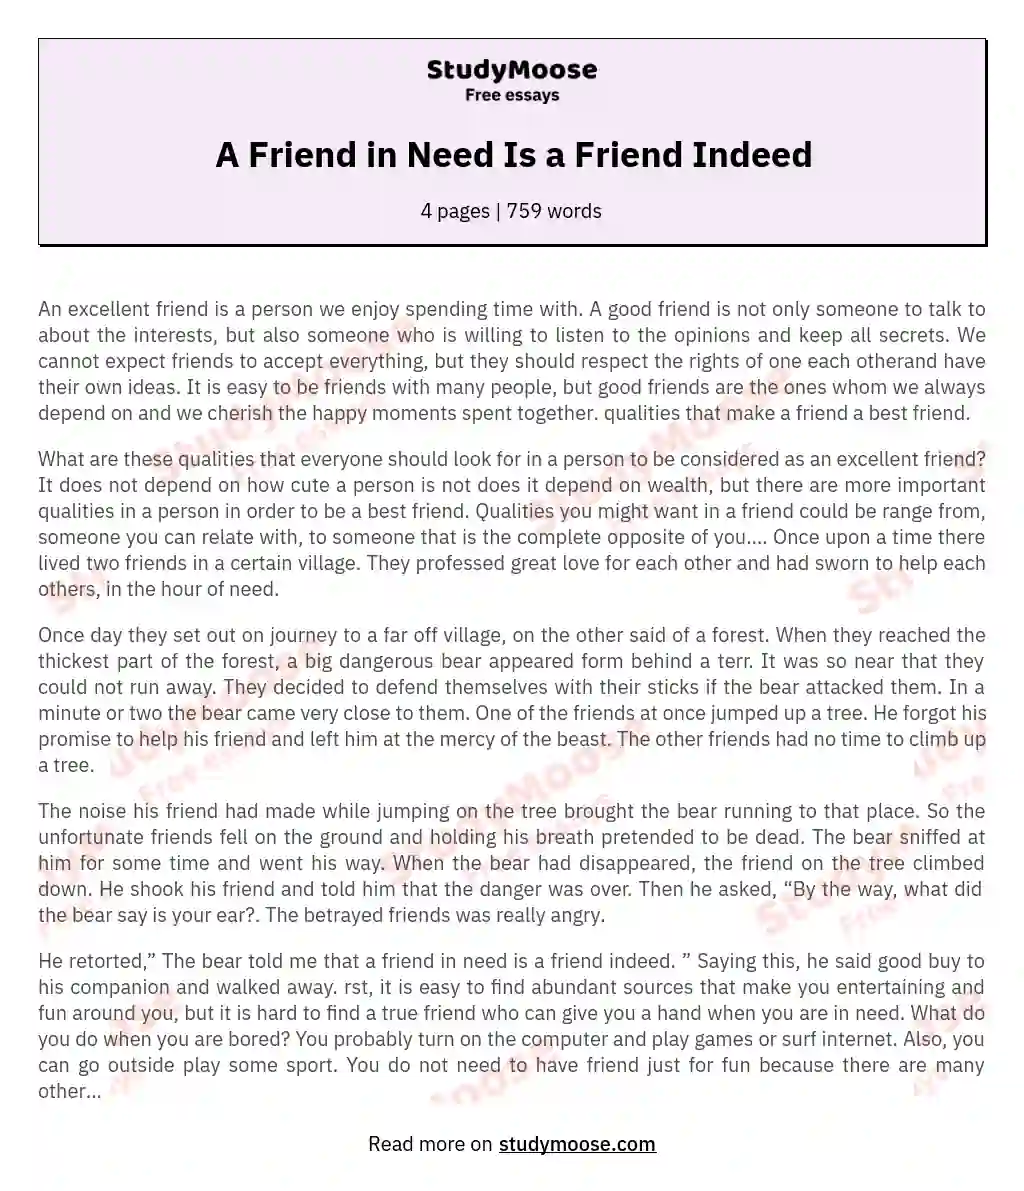 A Friend in Need Is a Friend Indeed essay